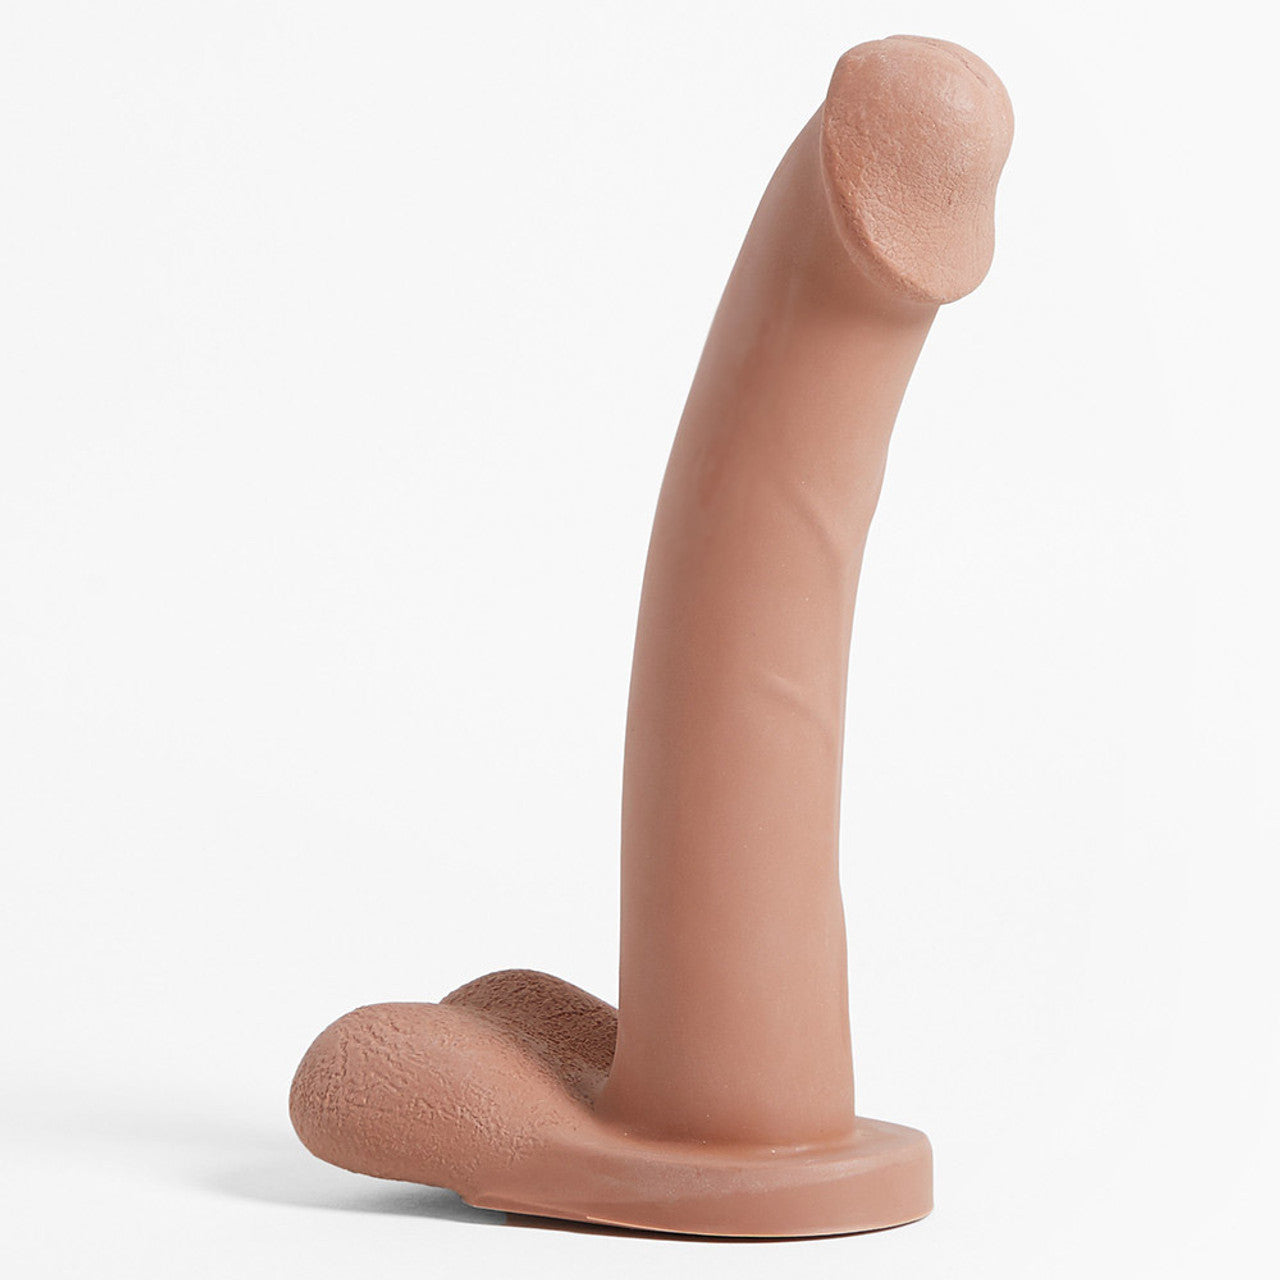 The light Admiral Dual Density Dildo standing upright.